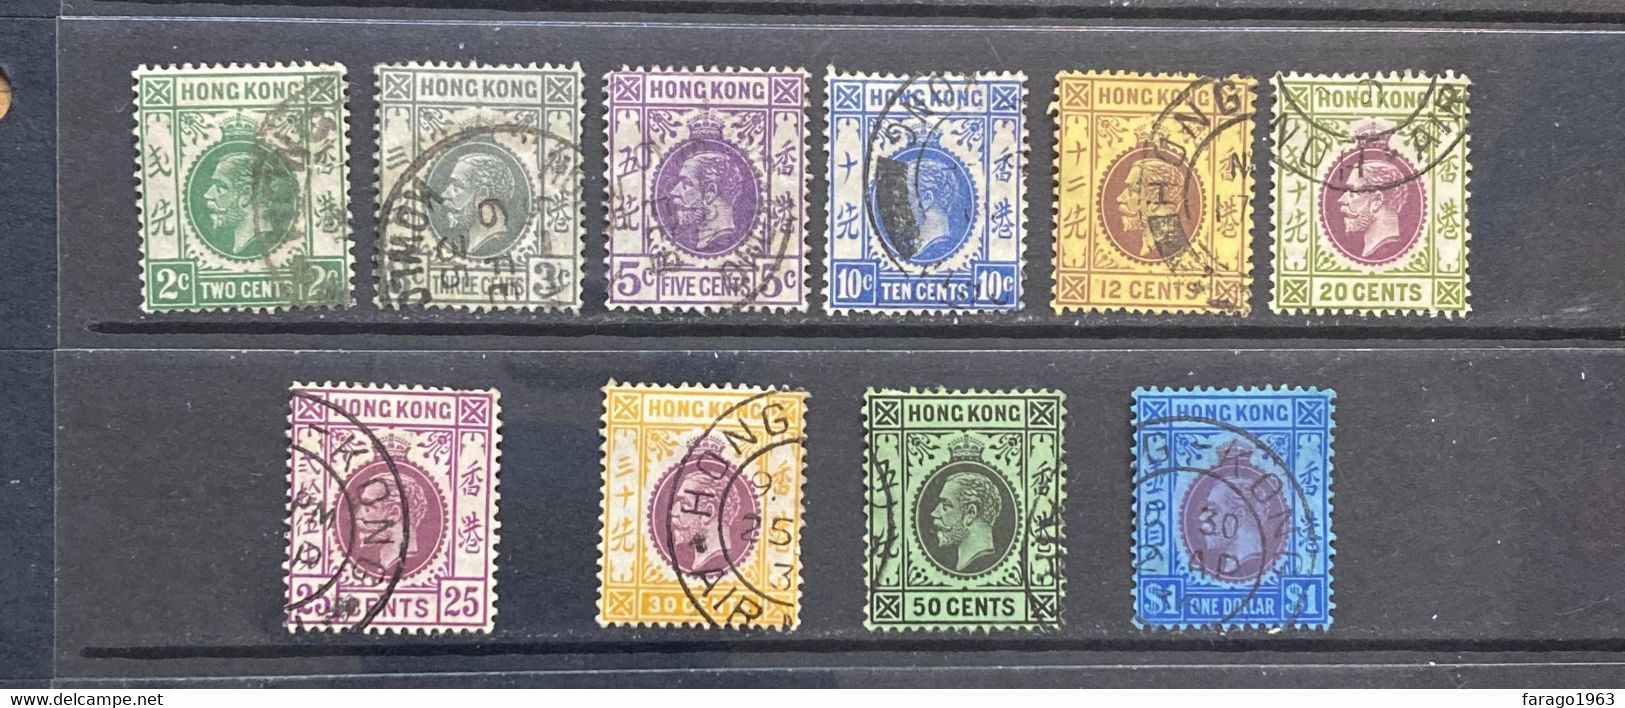 1921 Hong Kong KGV  2c//$1  Ten (10) Different Stamps VF CDS Used - Usados